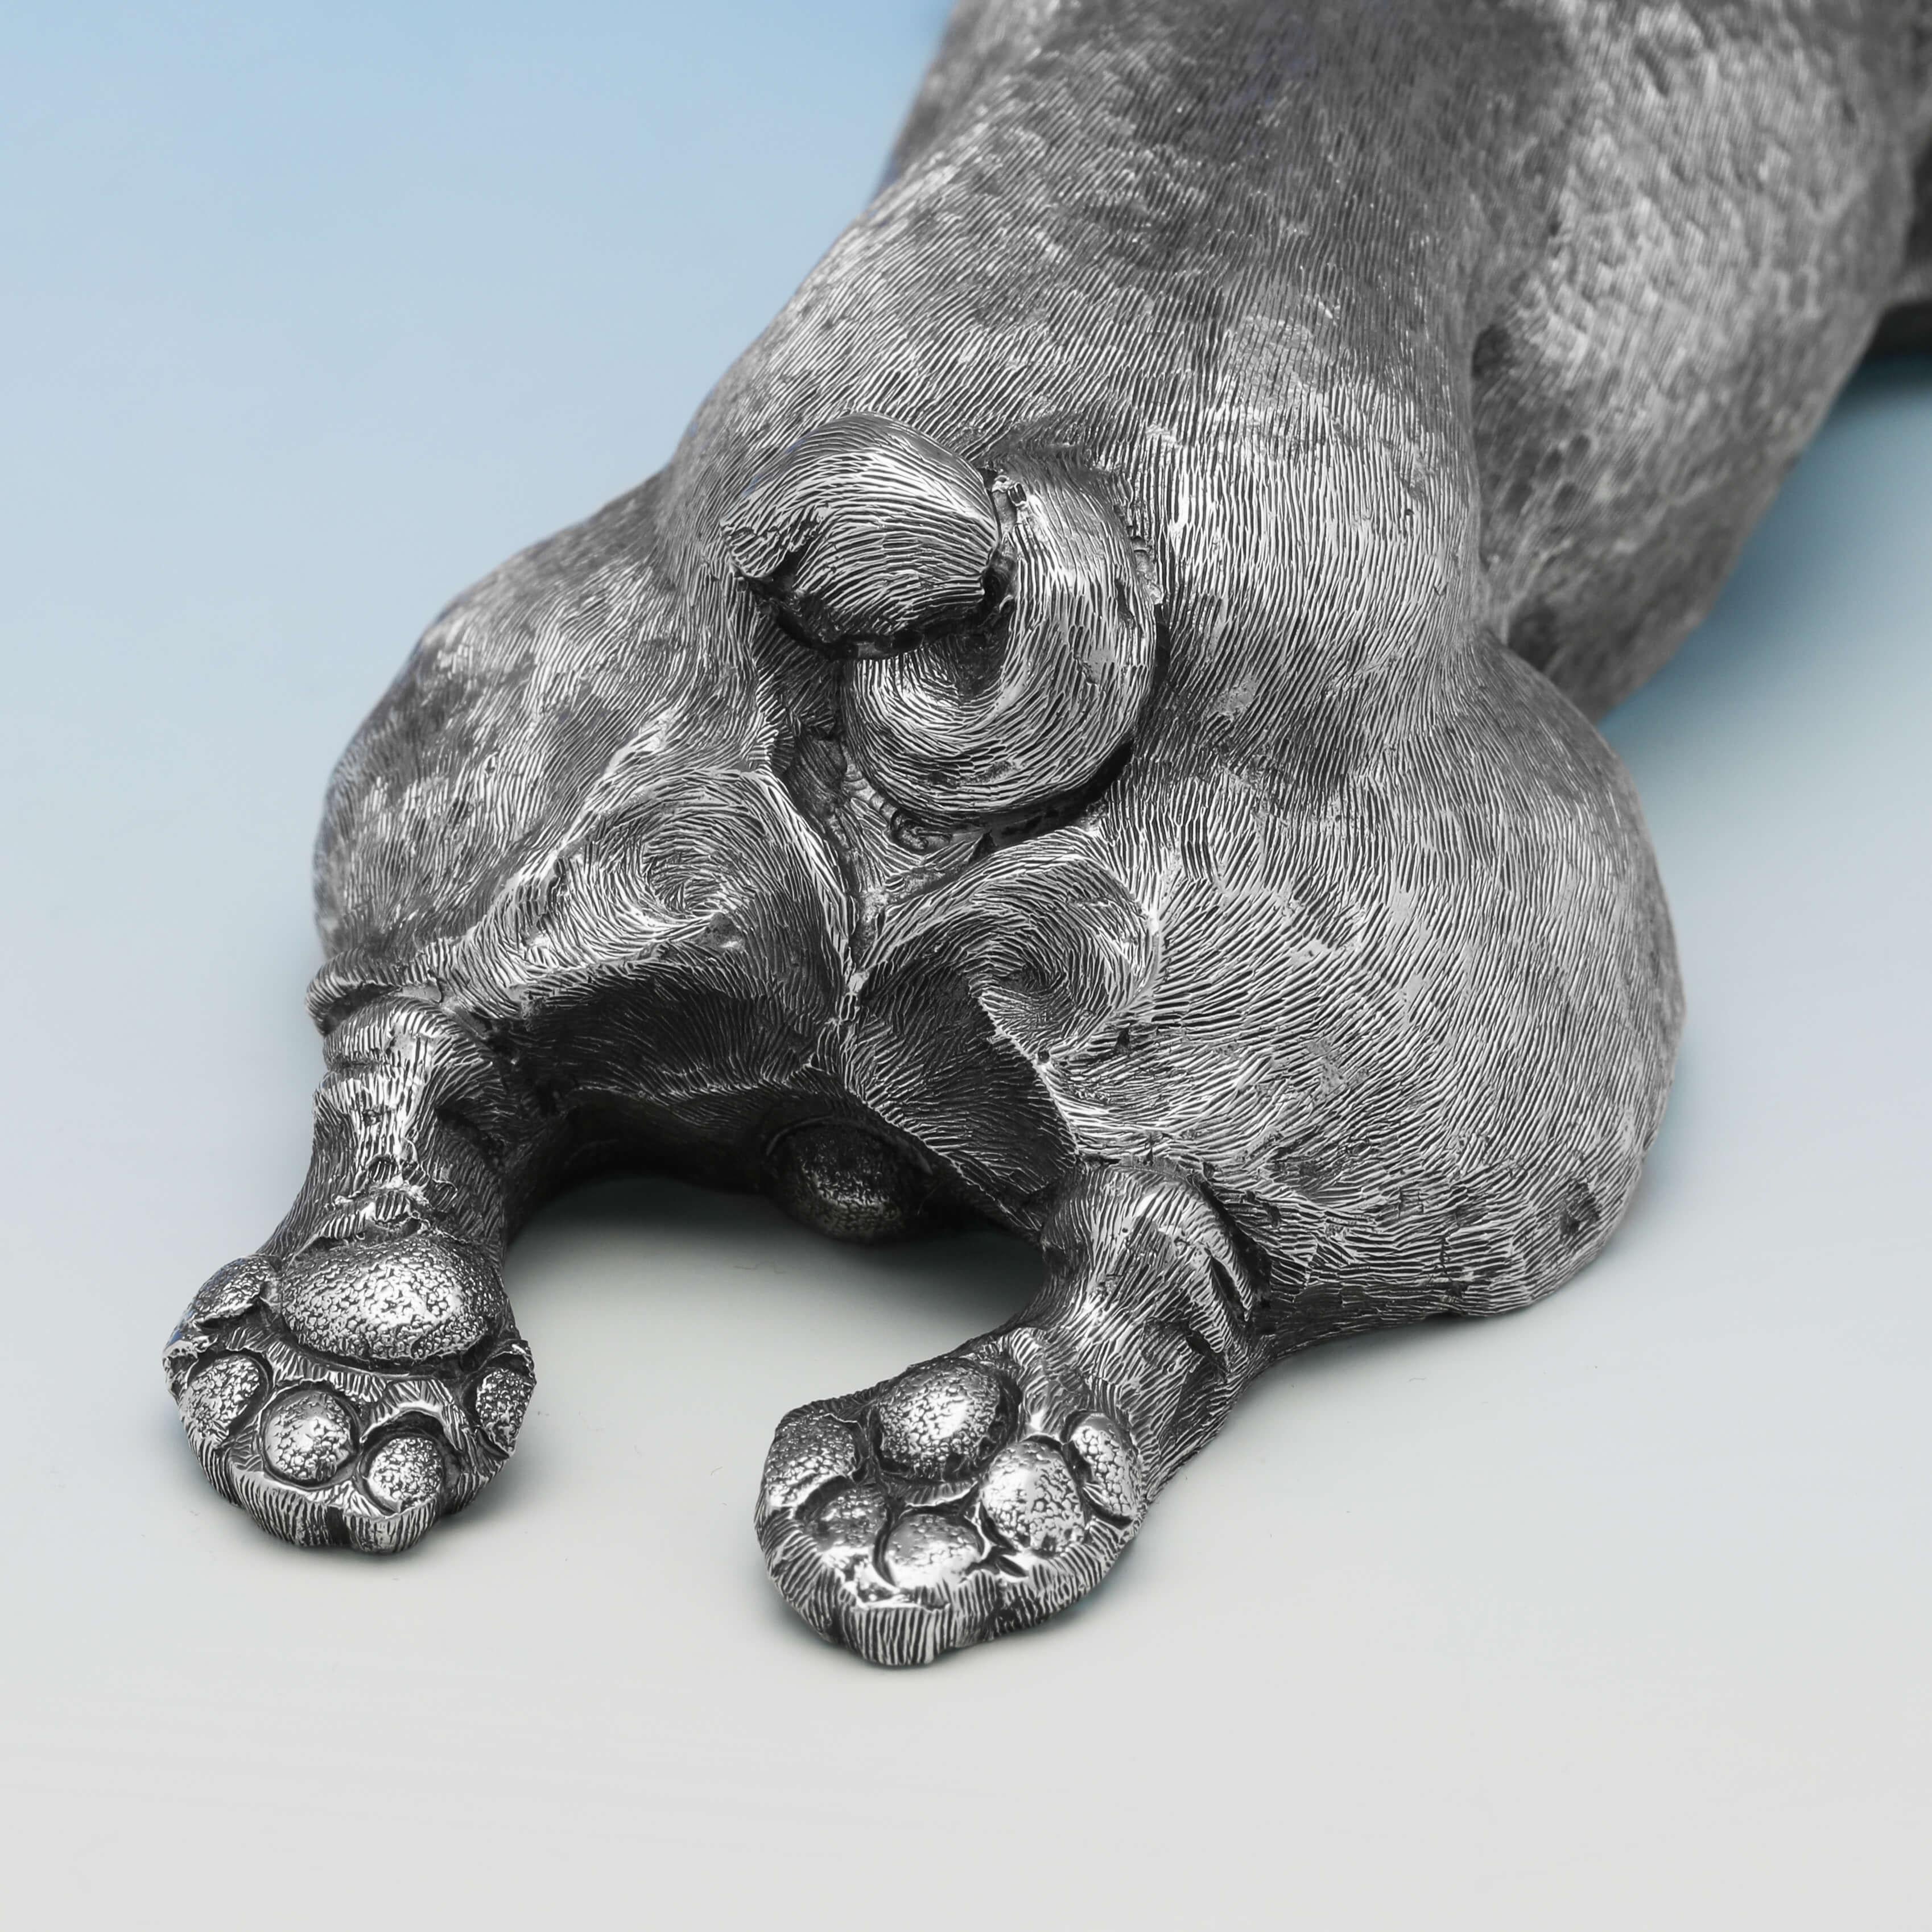 Late 20th Century Very Heavy Cast Sterling Silver Model of a Bulldog Hallmarked in London in 1976